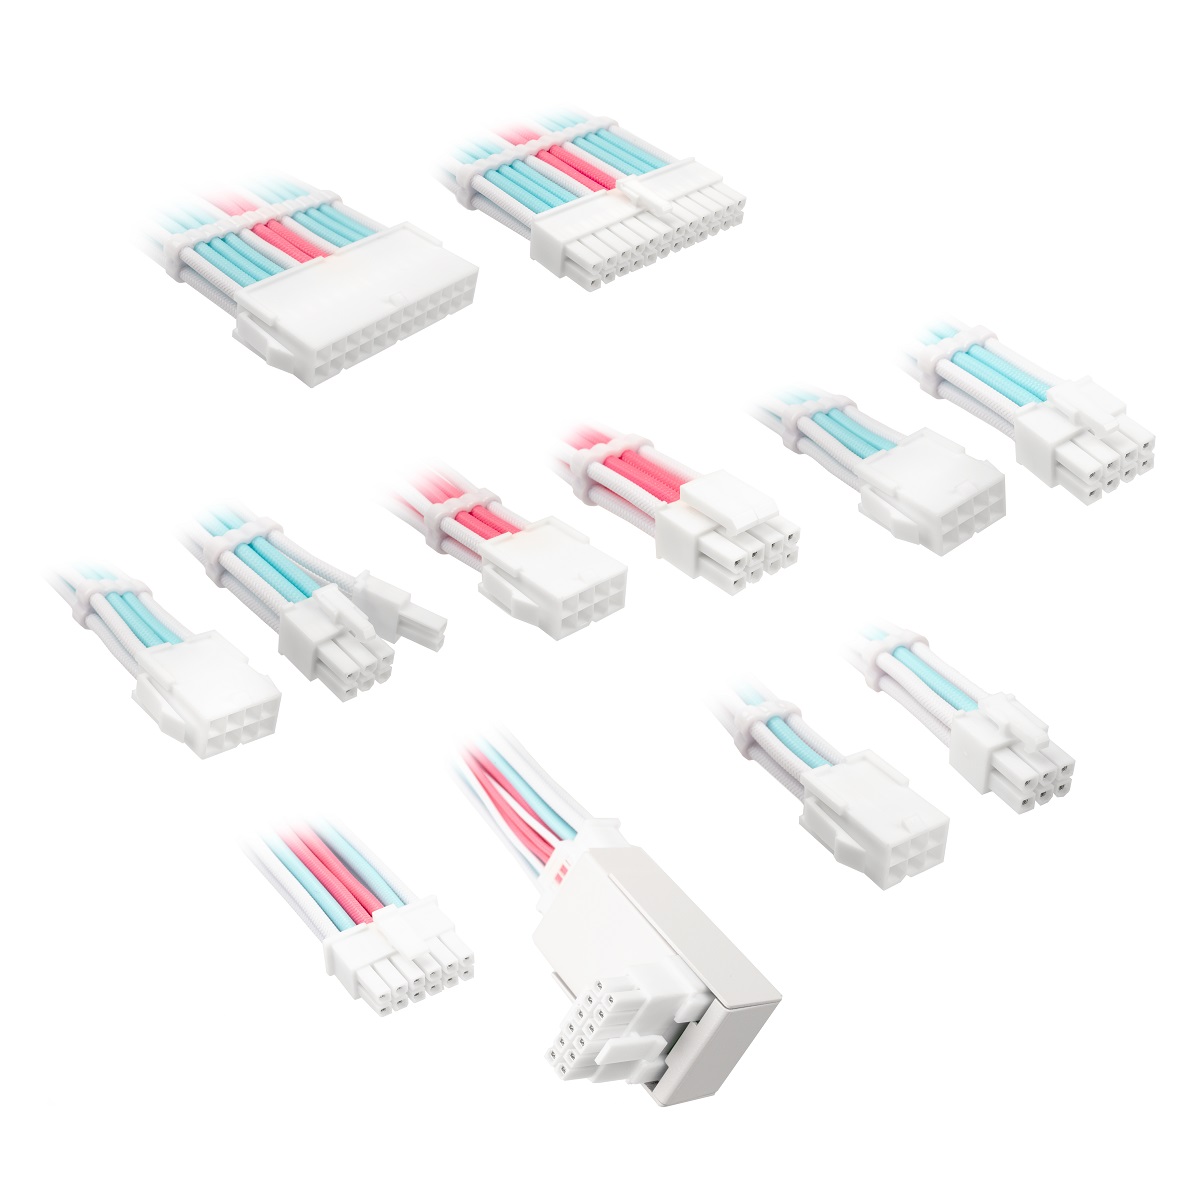 Kolink Core Pro Braided Cable Extension Kit 12VHWPR Type 1 - Brilliant White/Neon Blue/Pure Pink